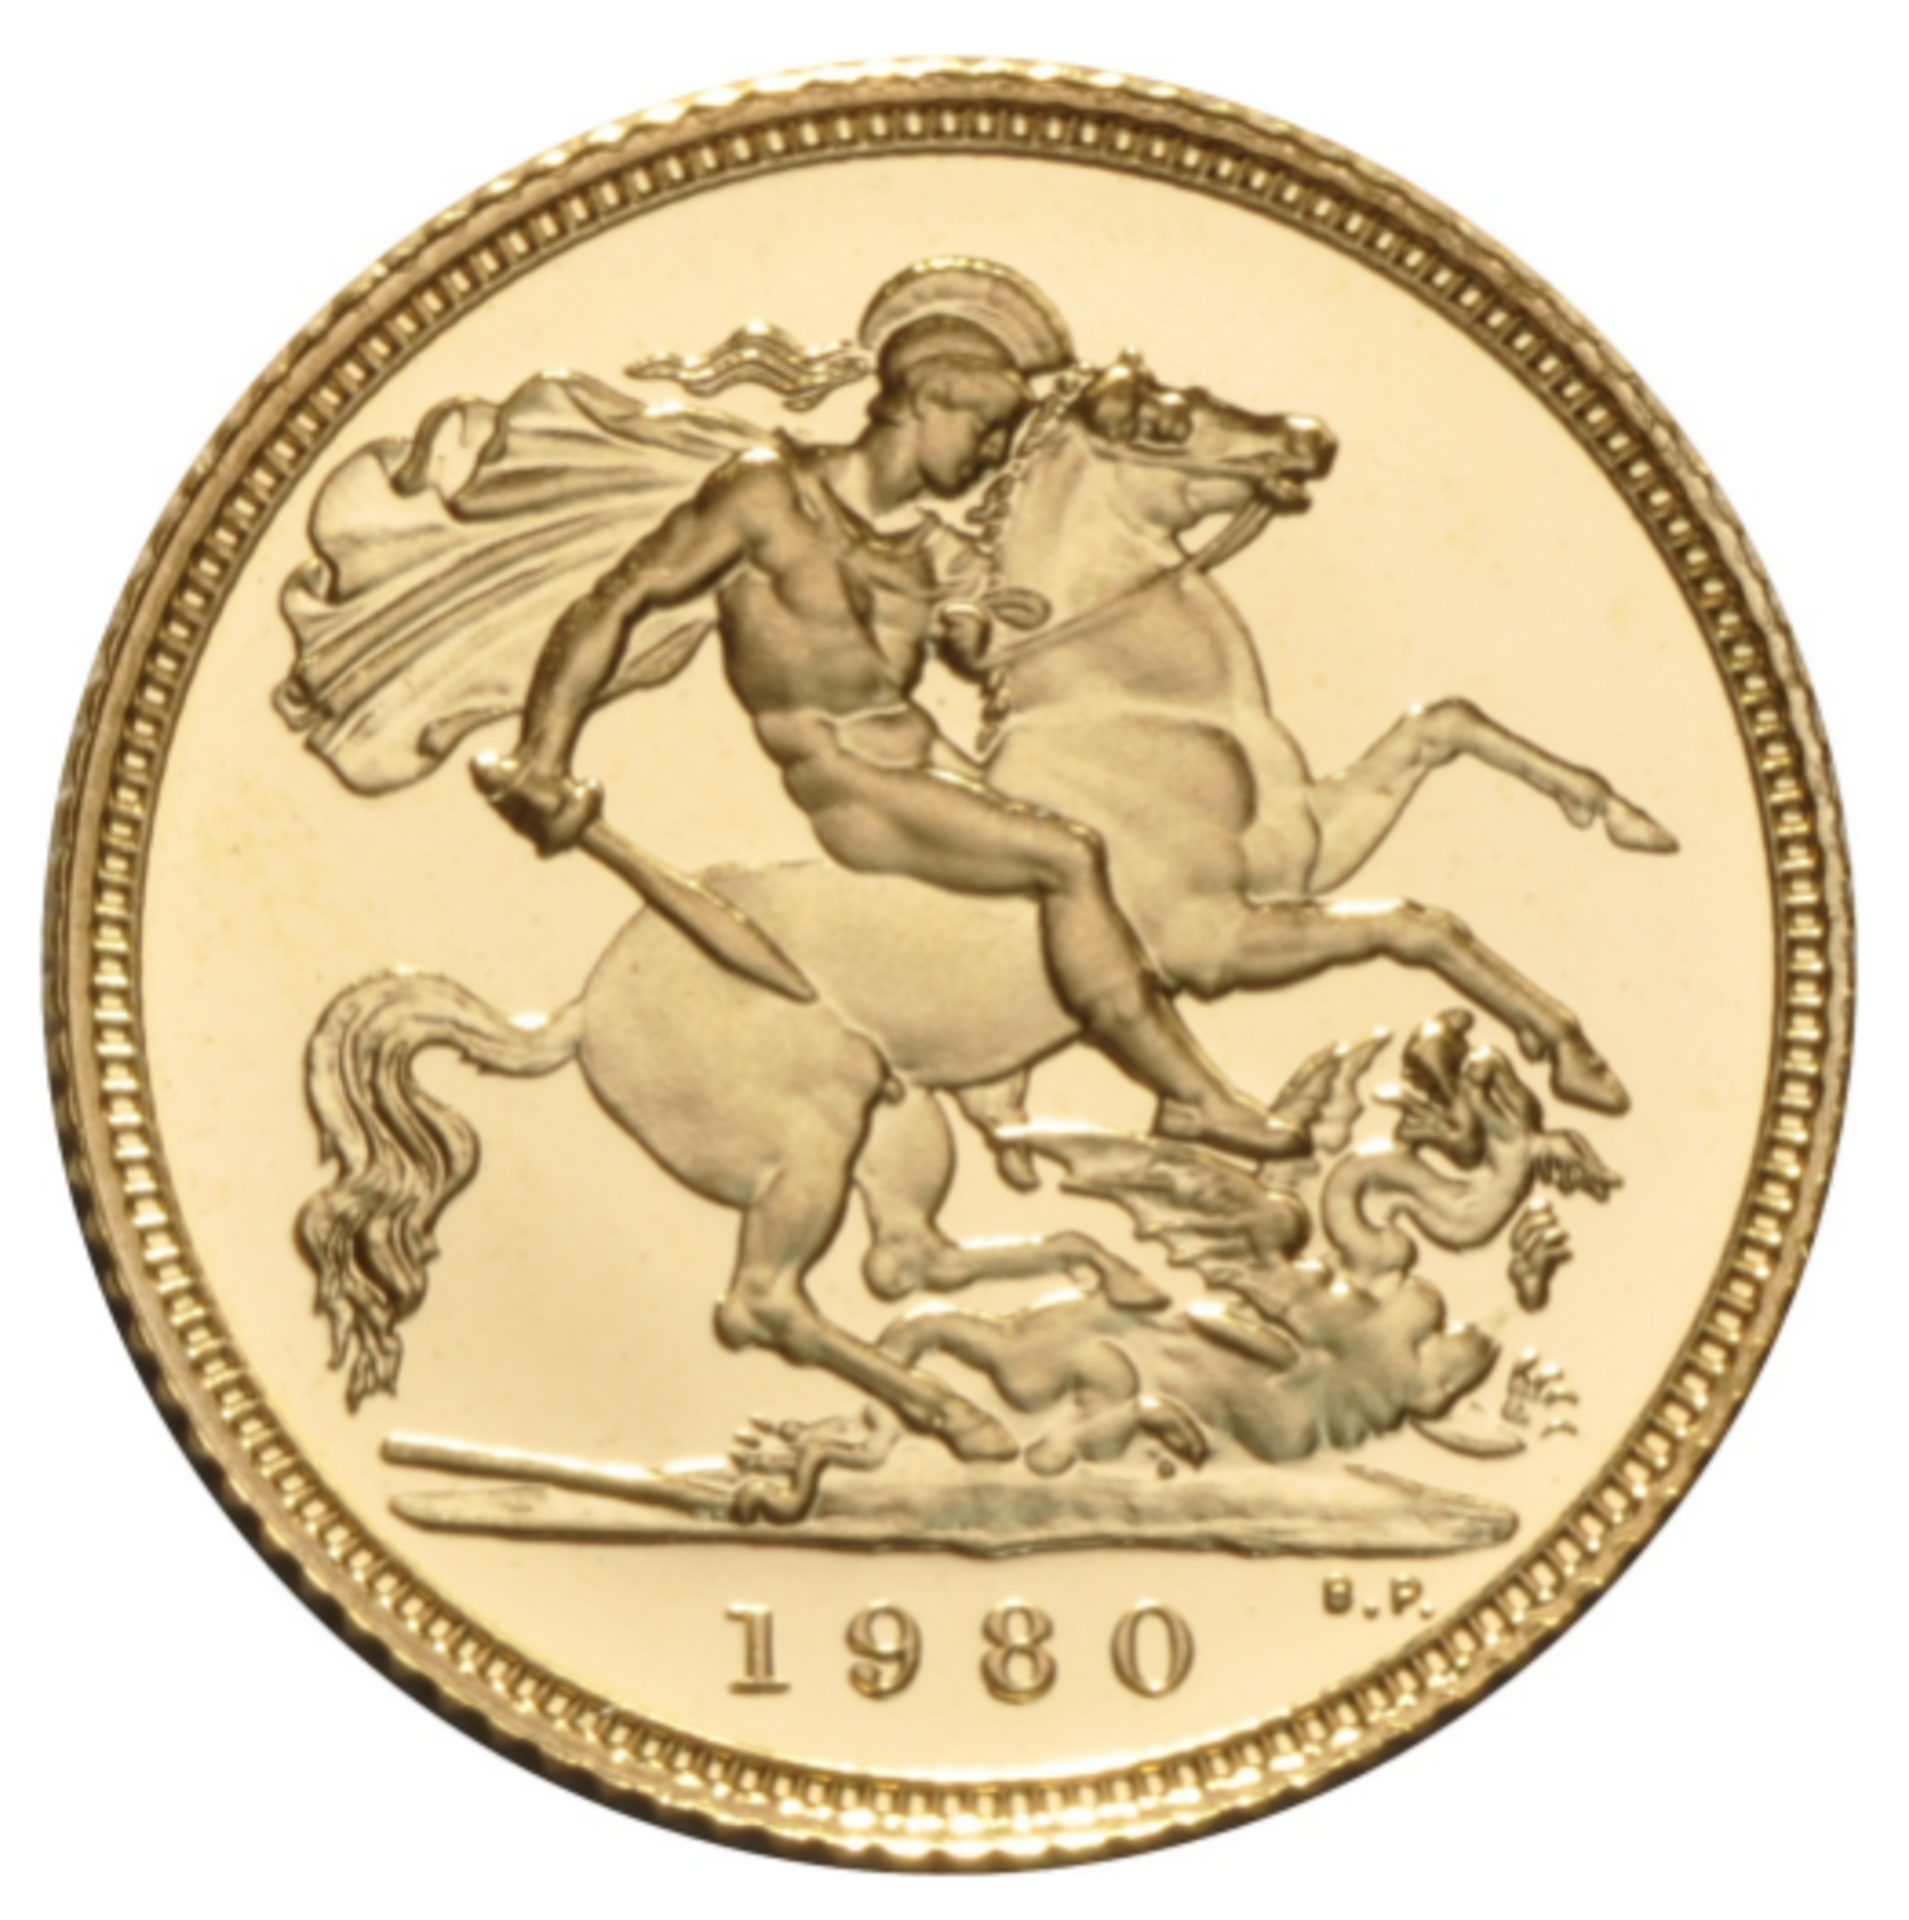 1980 Half Sovereign - Proof Coin